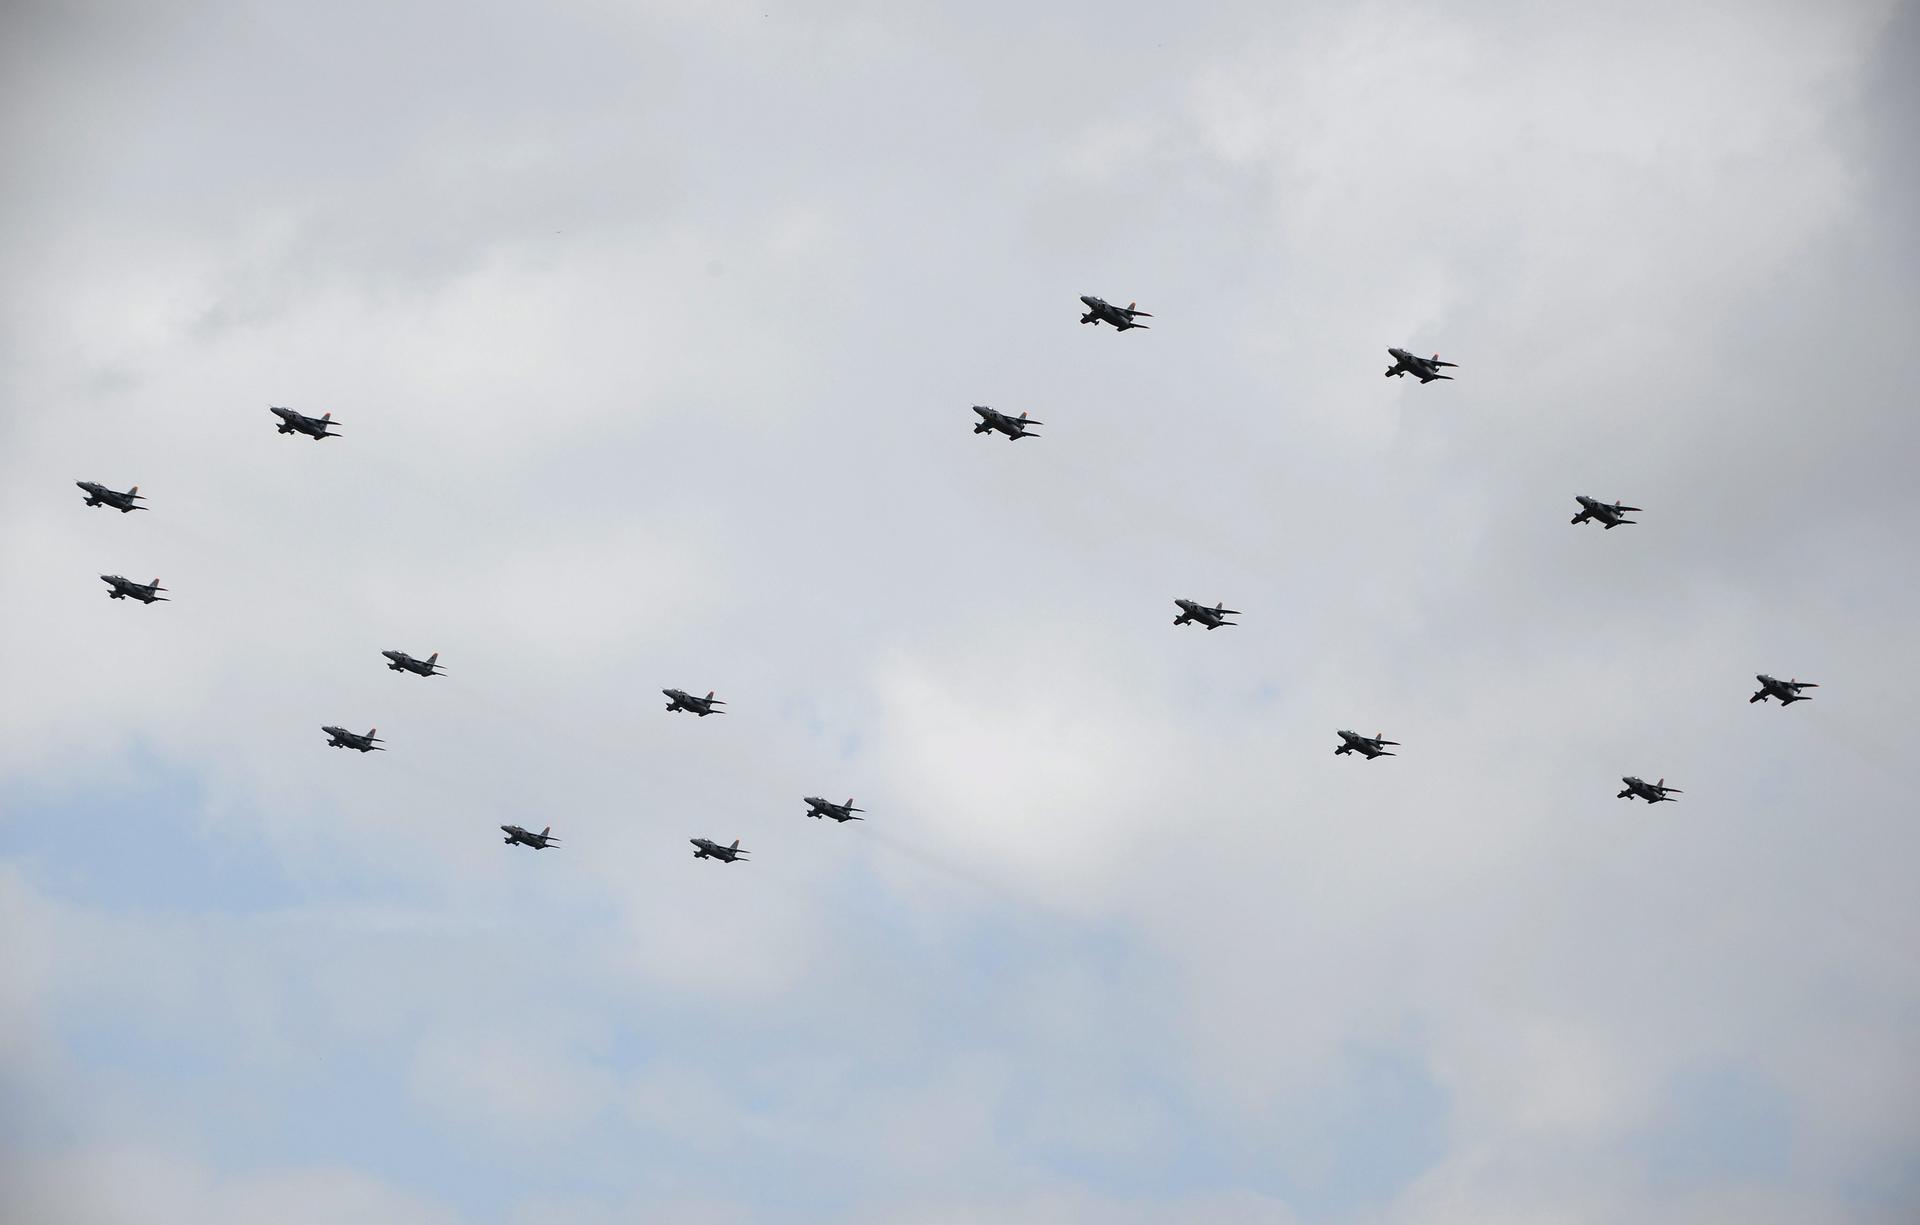 Japanese jets in formation.